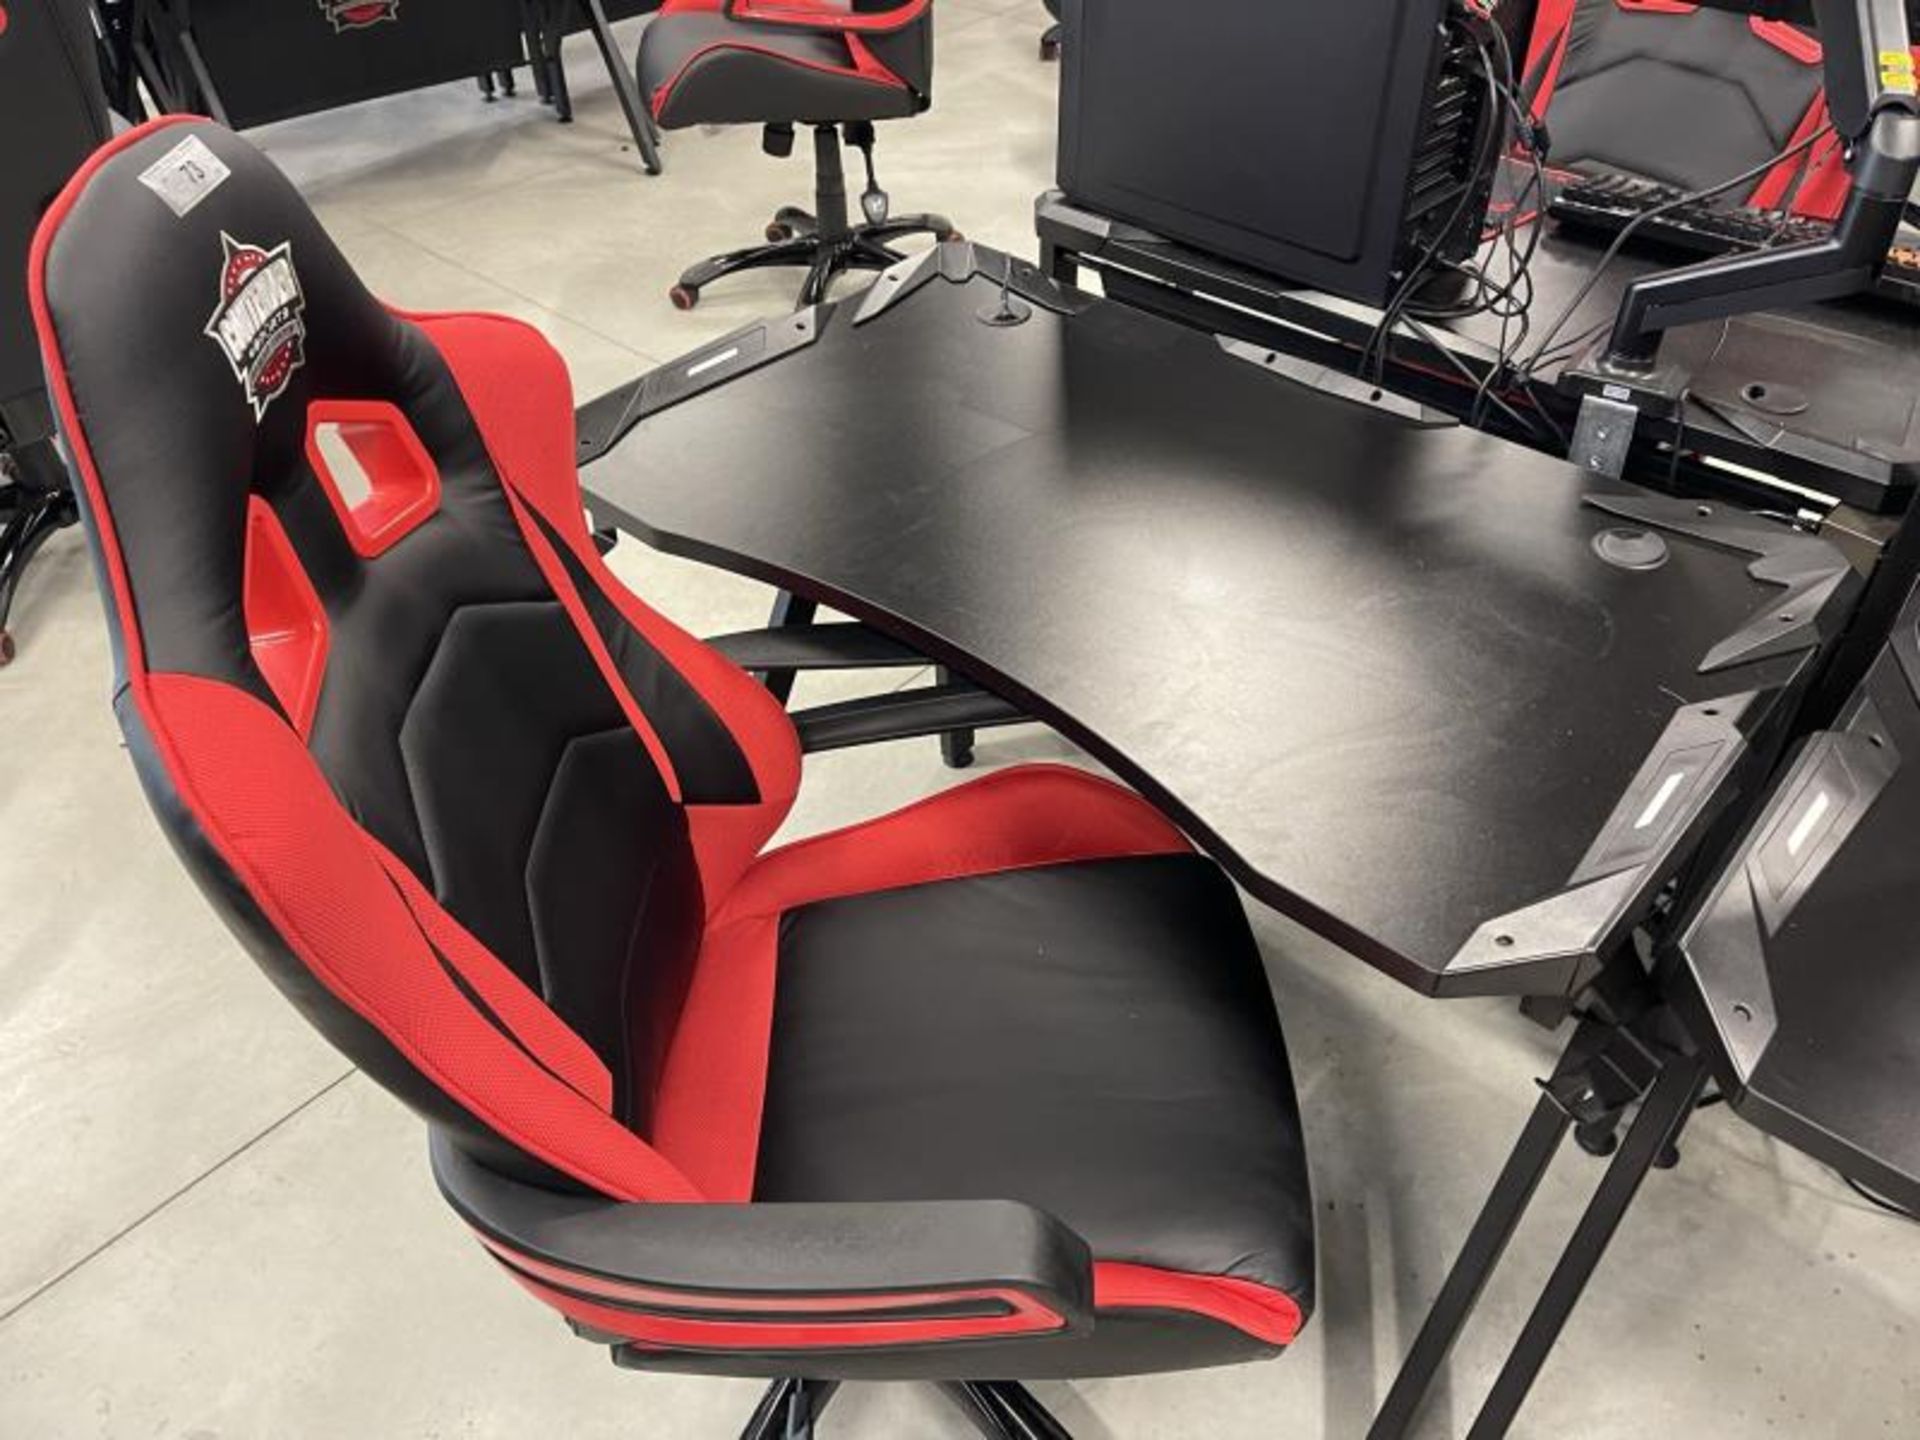 Gaming Desk 40" x 24" w/ Contender Red & Black Gaming Chair - Image 4 of 4